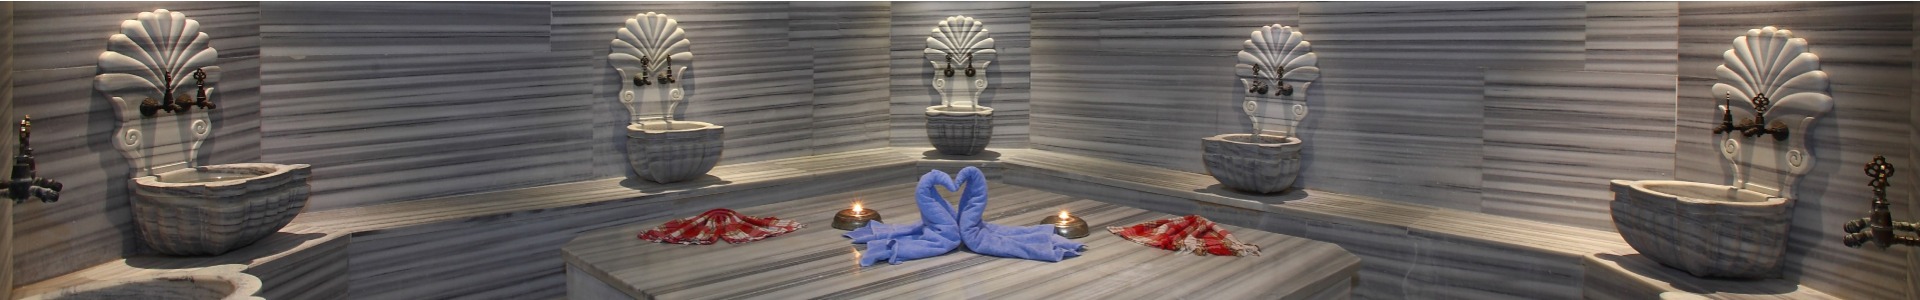 the hamam: a tradition harnessing the healing properties of water